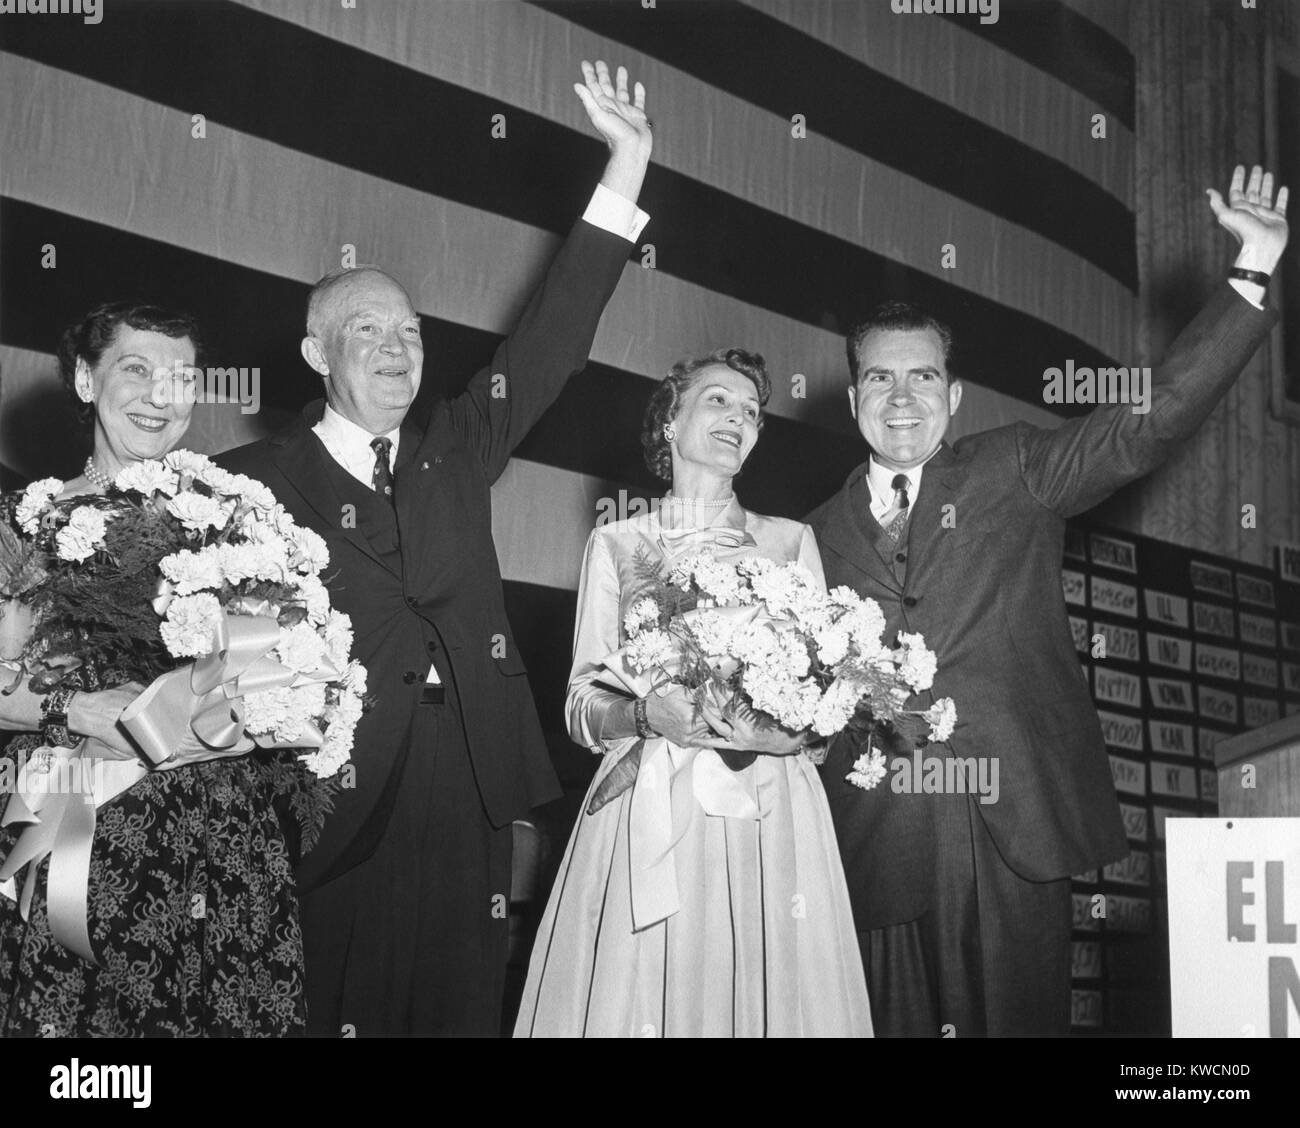 Newly re-elected President Dwight Eisenhower and VP Richard Nixon on election night. Nov. 6, 1956. Their wives, Mamie Eisenhower and Patricia Nixon hold flowers and smile. - (BSLOC 2014 14 41) Stock Photo